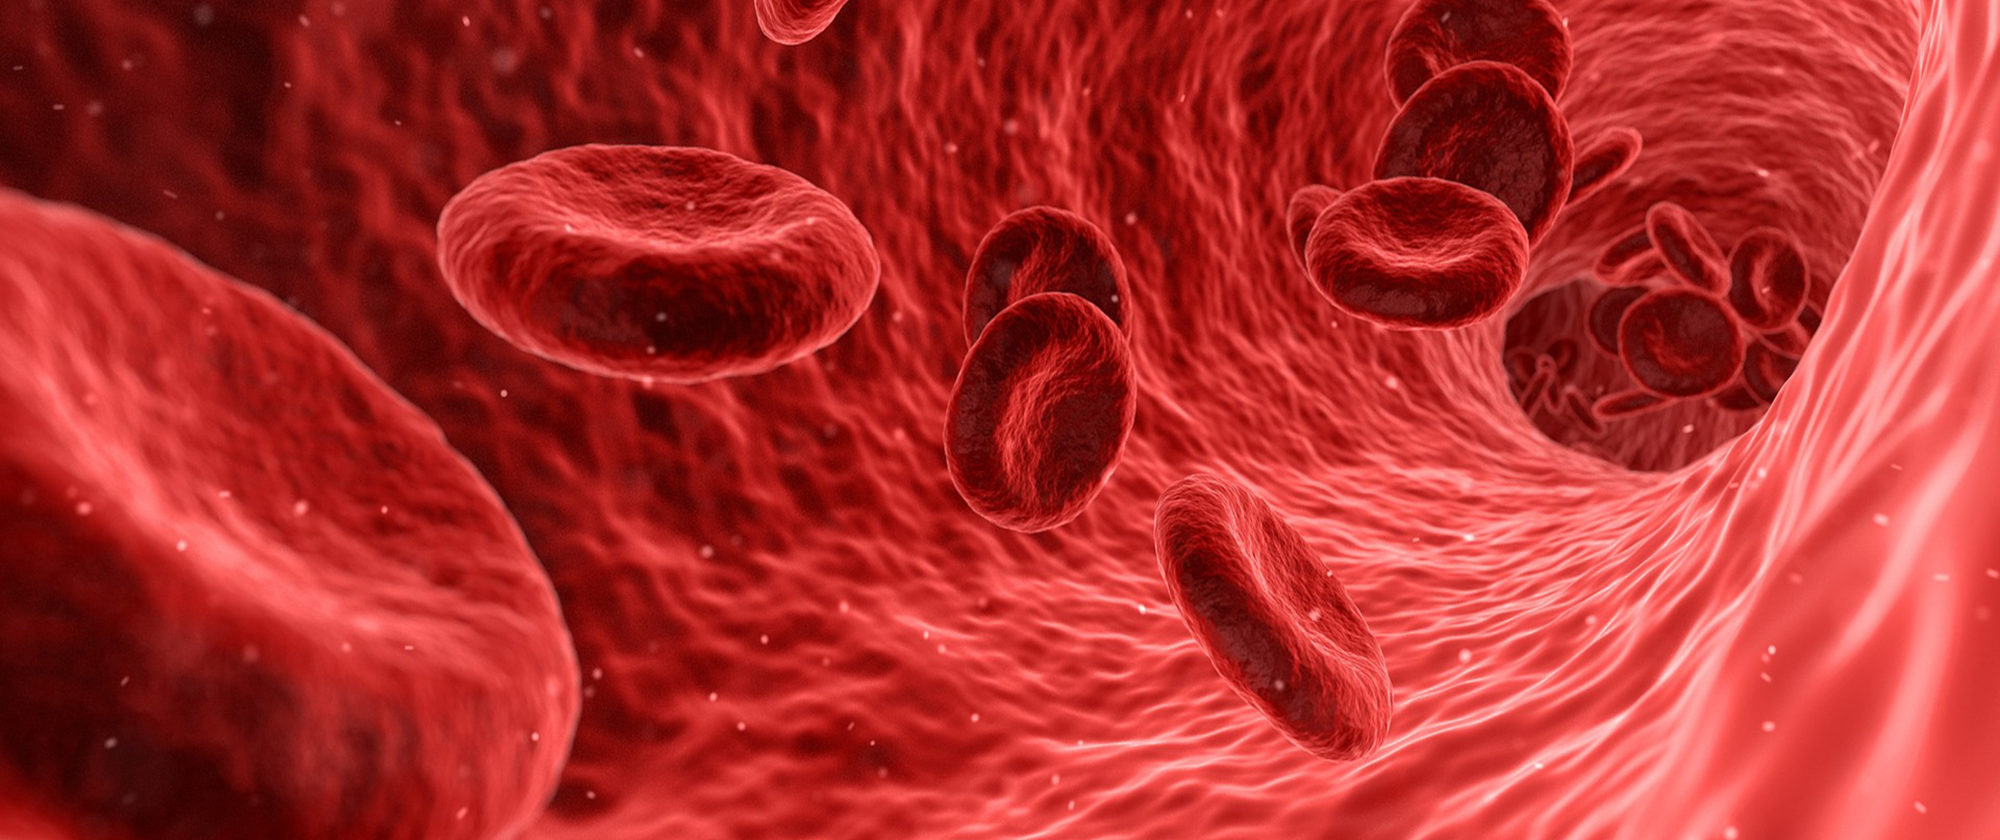 Erythrocytes are the majority of the blood cells, and give the blood its red colour. In leukemia, the proportions of blood cells are reversed.